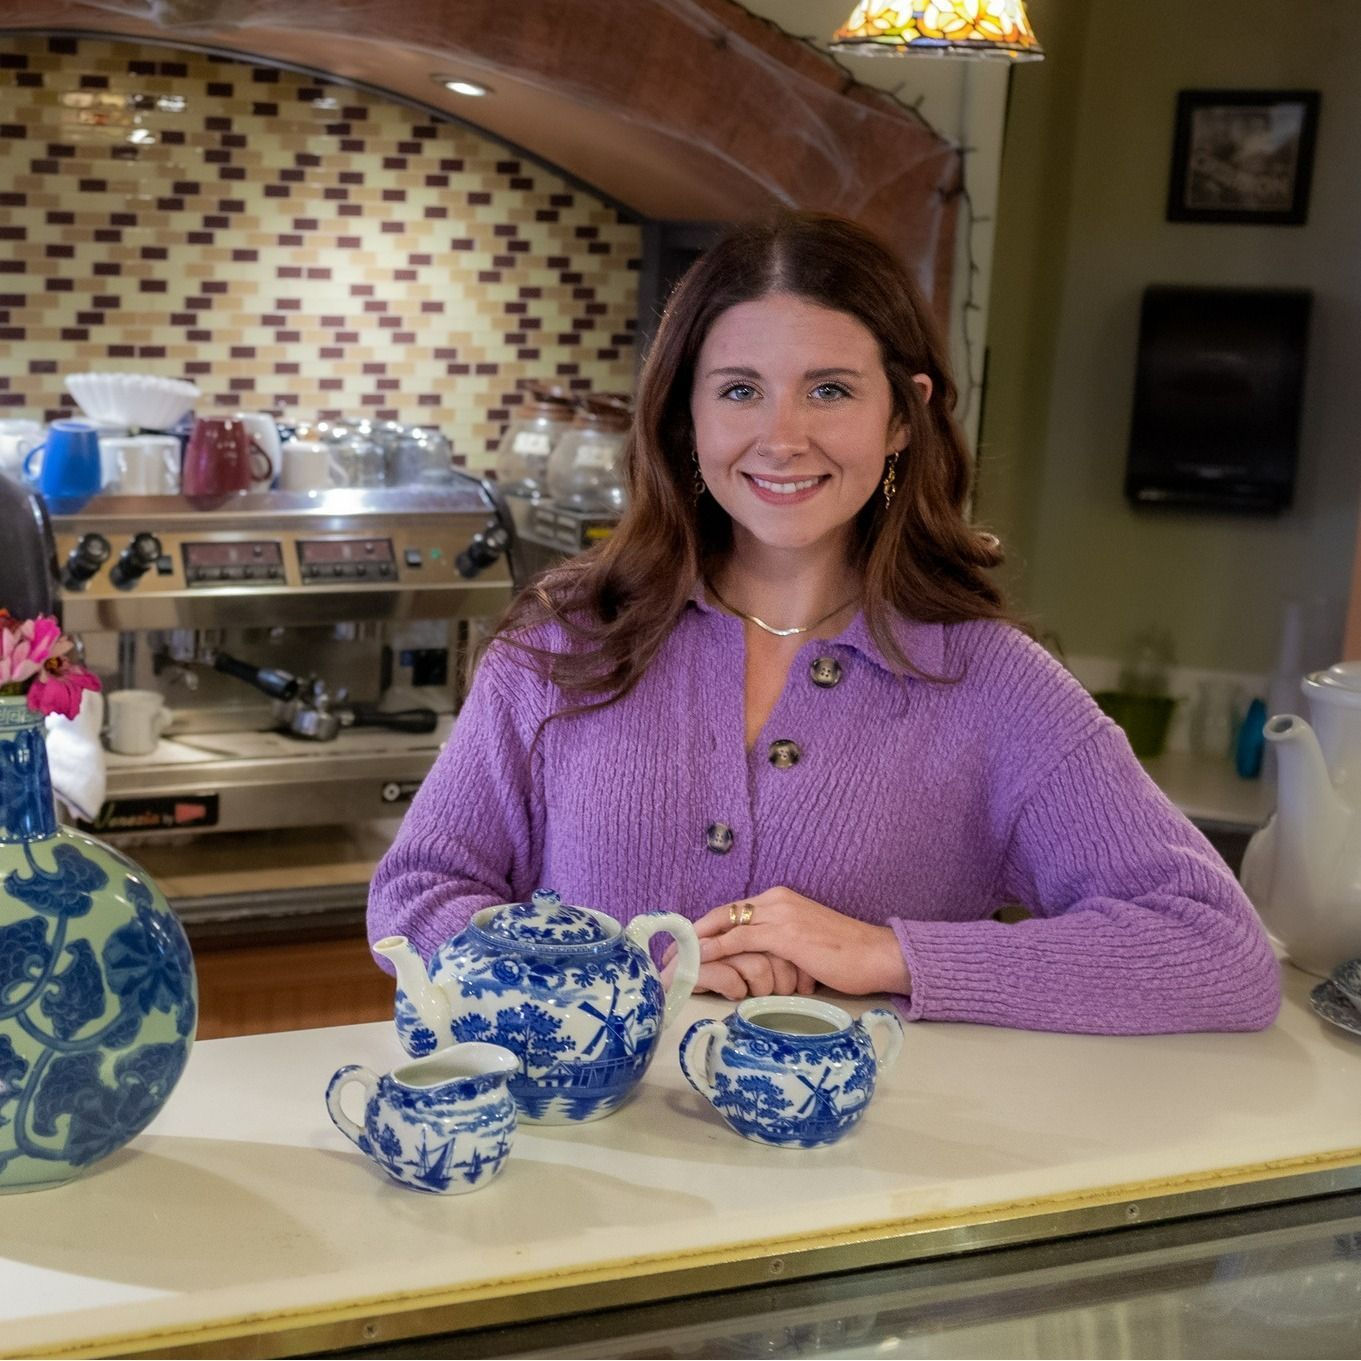 A woman in a purple sweater is sitting at a counter with a teapot and cups